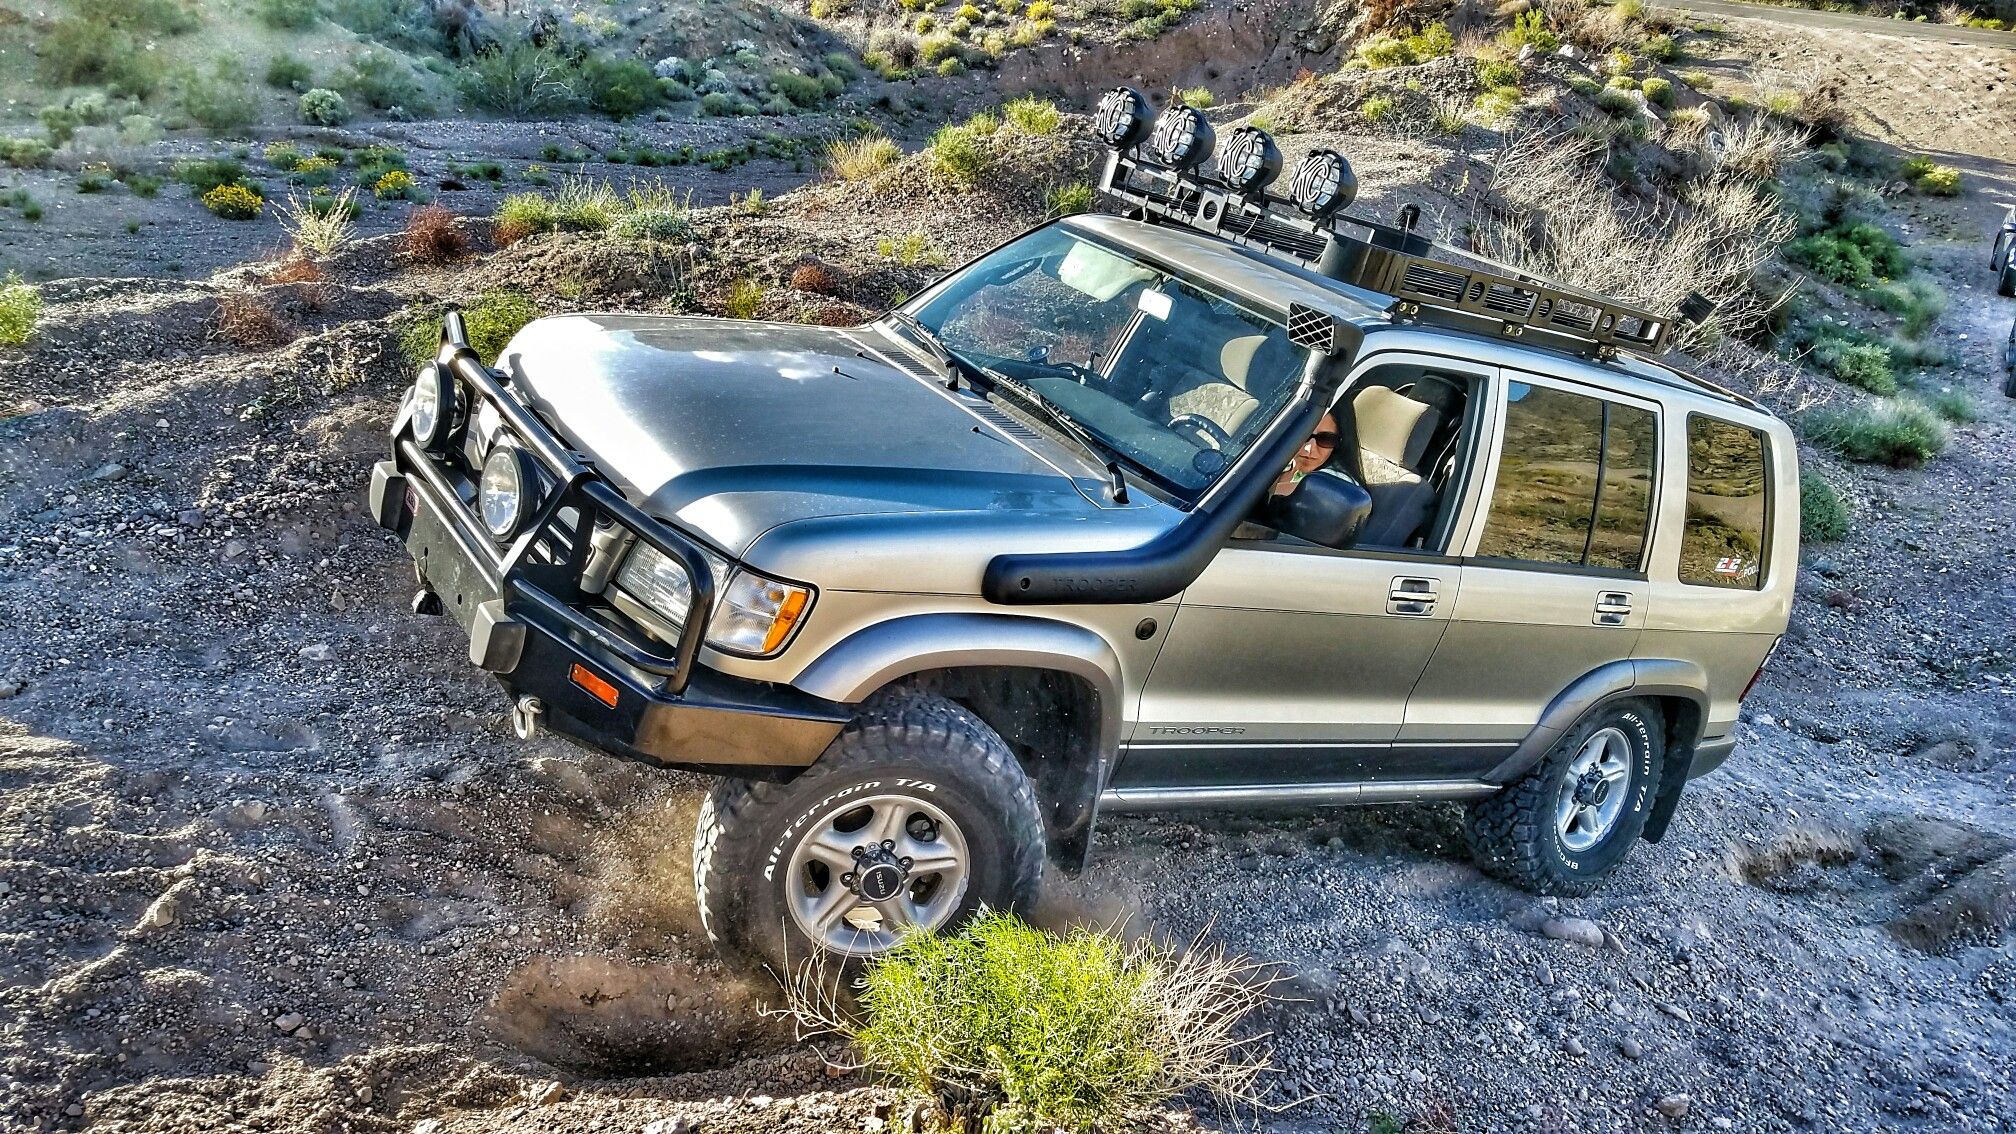 2001 #isuzutrooper 3.6l V6 on #bfgoodrich #Ko2 All Terrains  #trailtrooper4wd on Instagram. | Coches todoterreno, Coches increíbles,  Autos